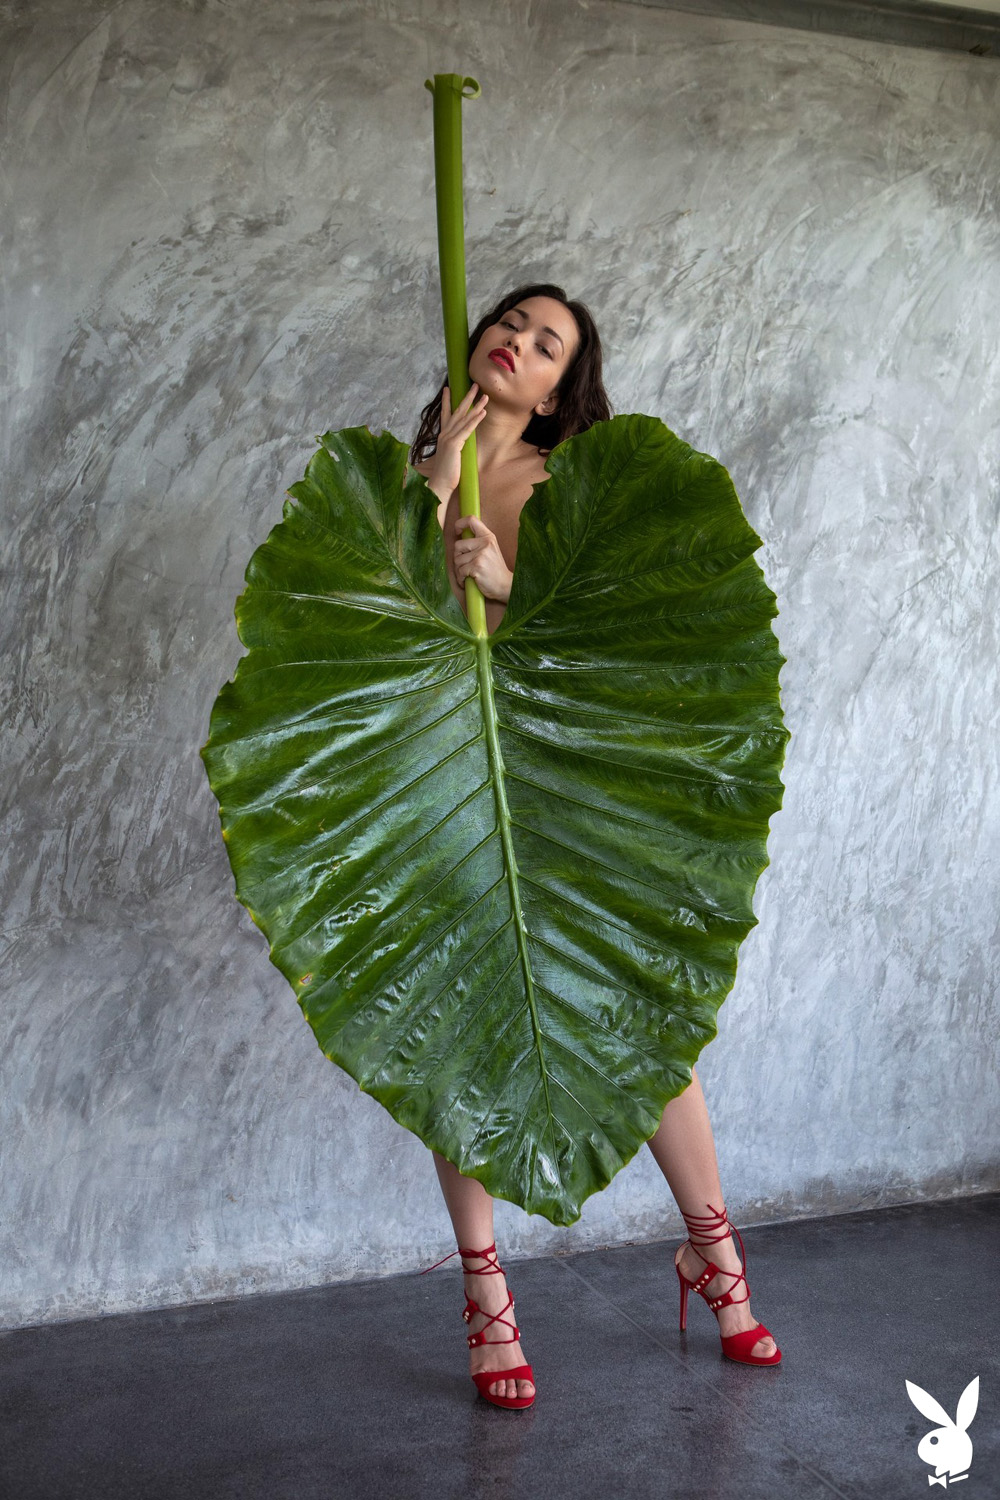 Kit Rysha unveils her spectacular beauty from behind a big green tropical leaf